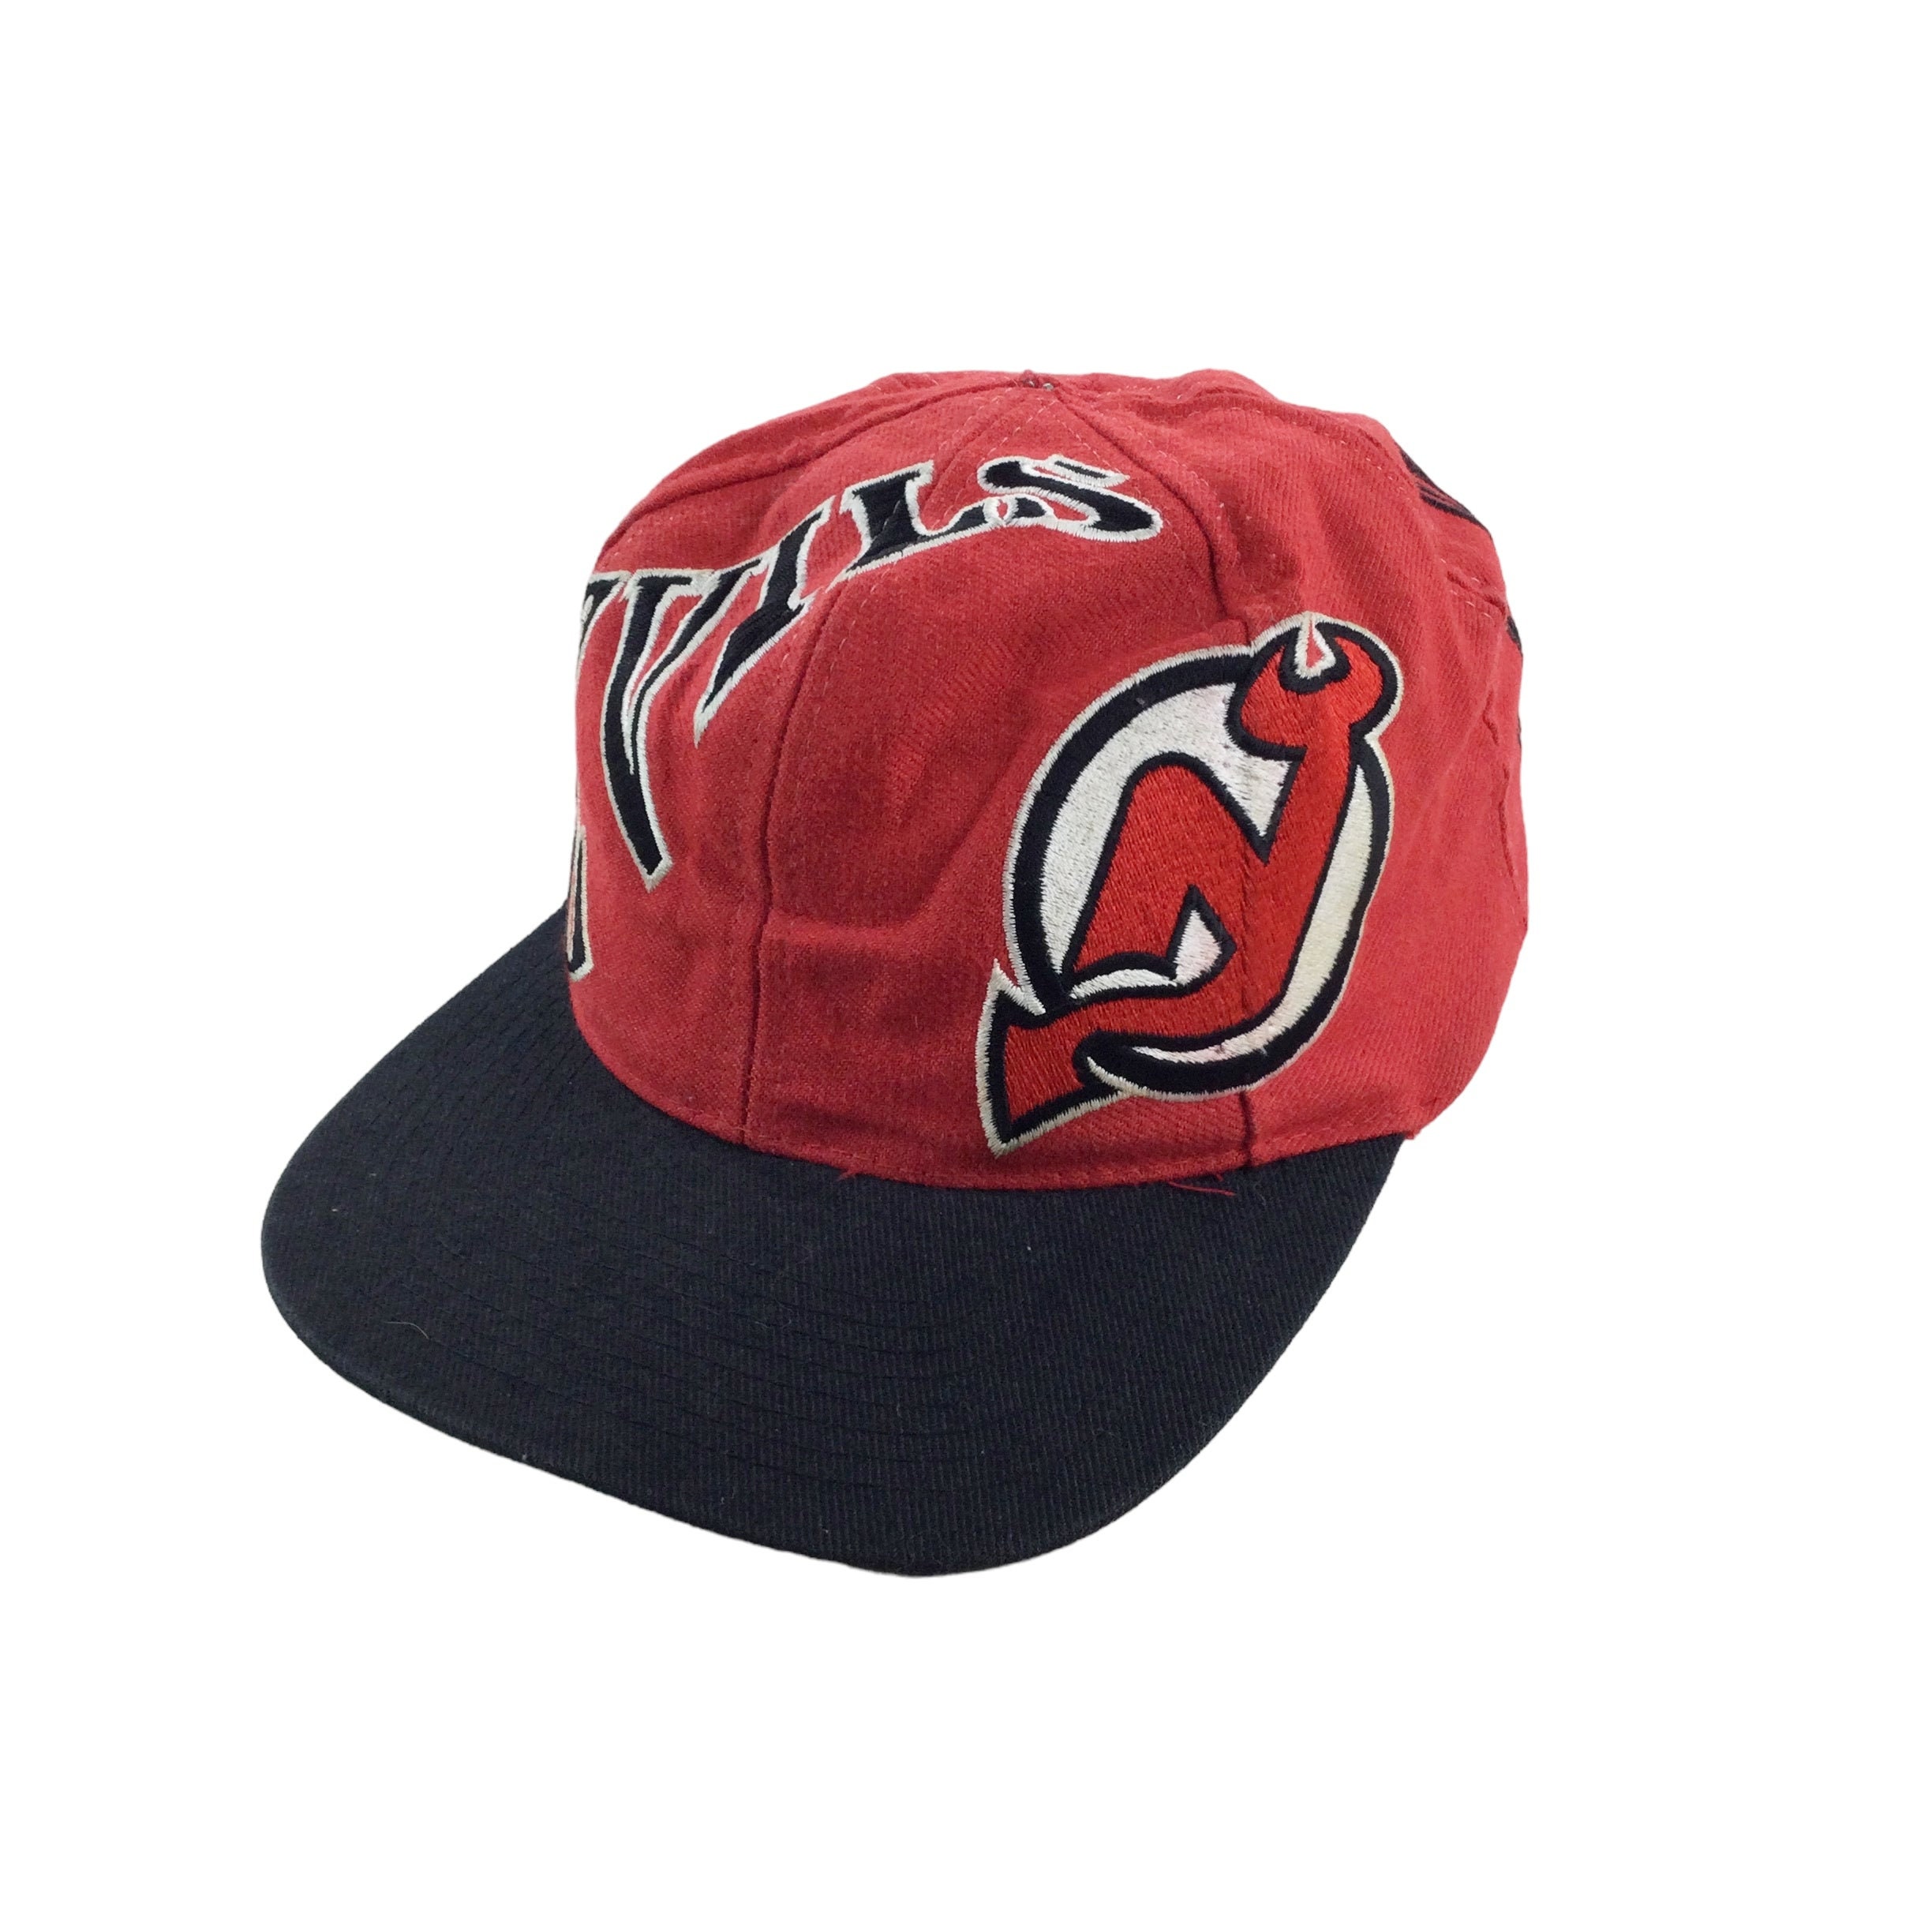 Vintage New Jersey Devils Fitted Hat New Era Made USA Size 7 3/8 NHL Hockey New Jersey NJ 1990s 90s